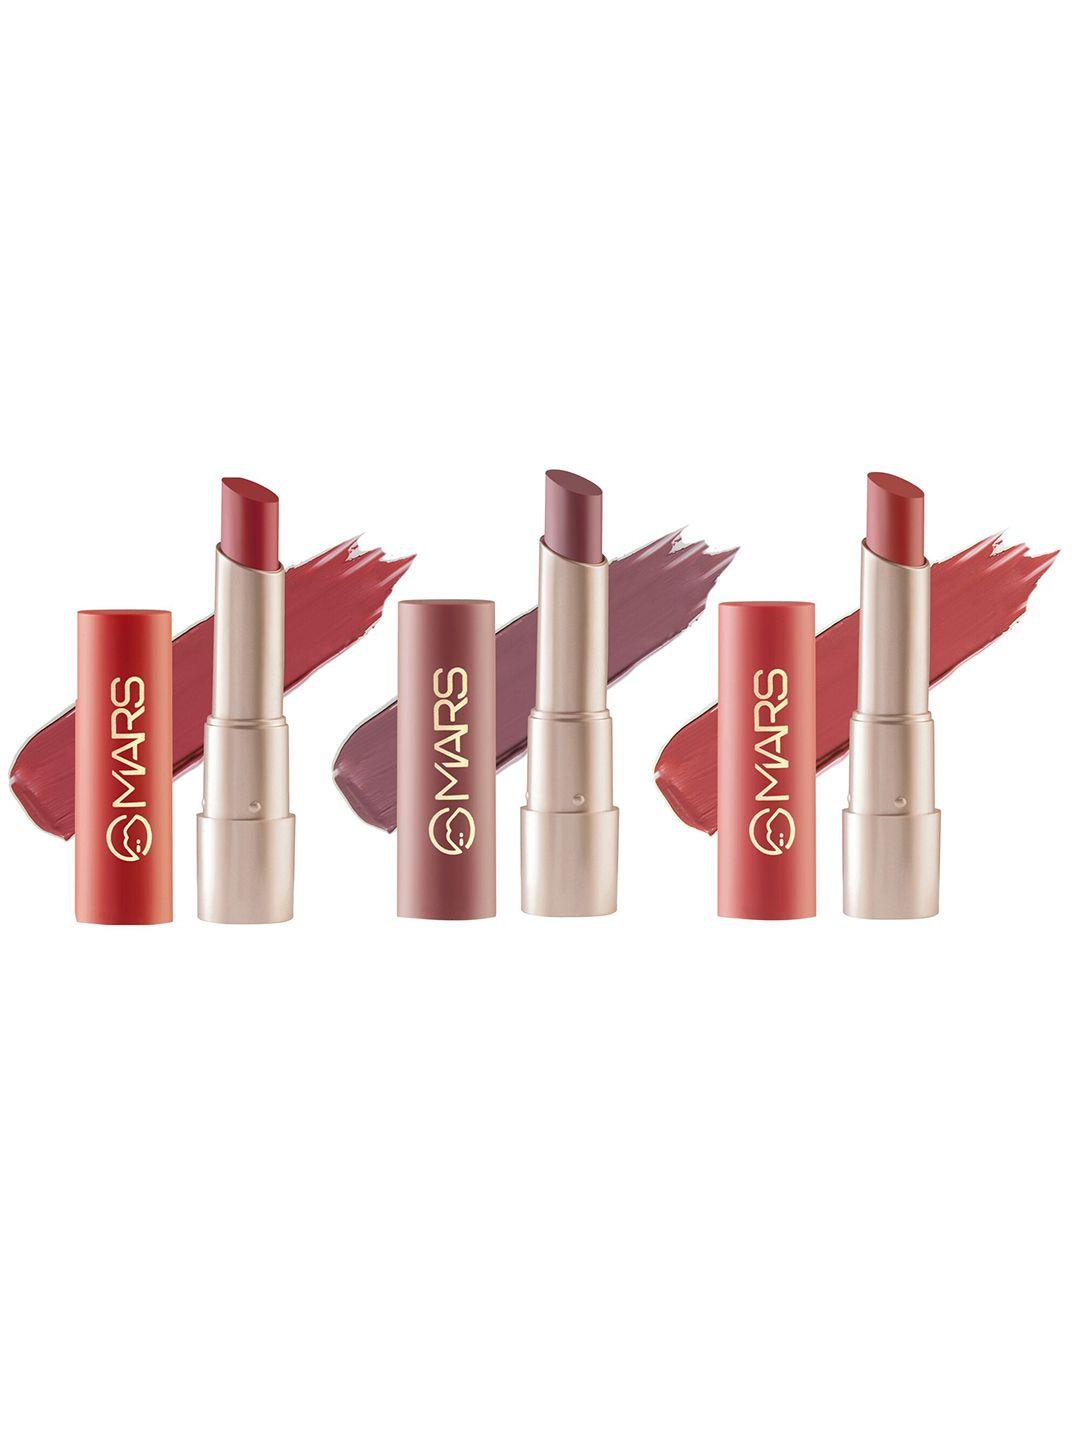 mars creamy matte set of 3 highly pigmented bullet lipstick - 3.2gm each